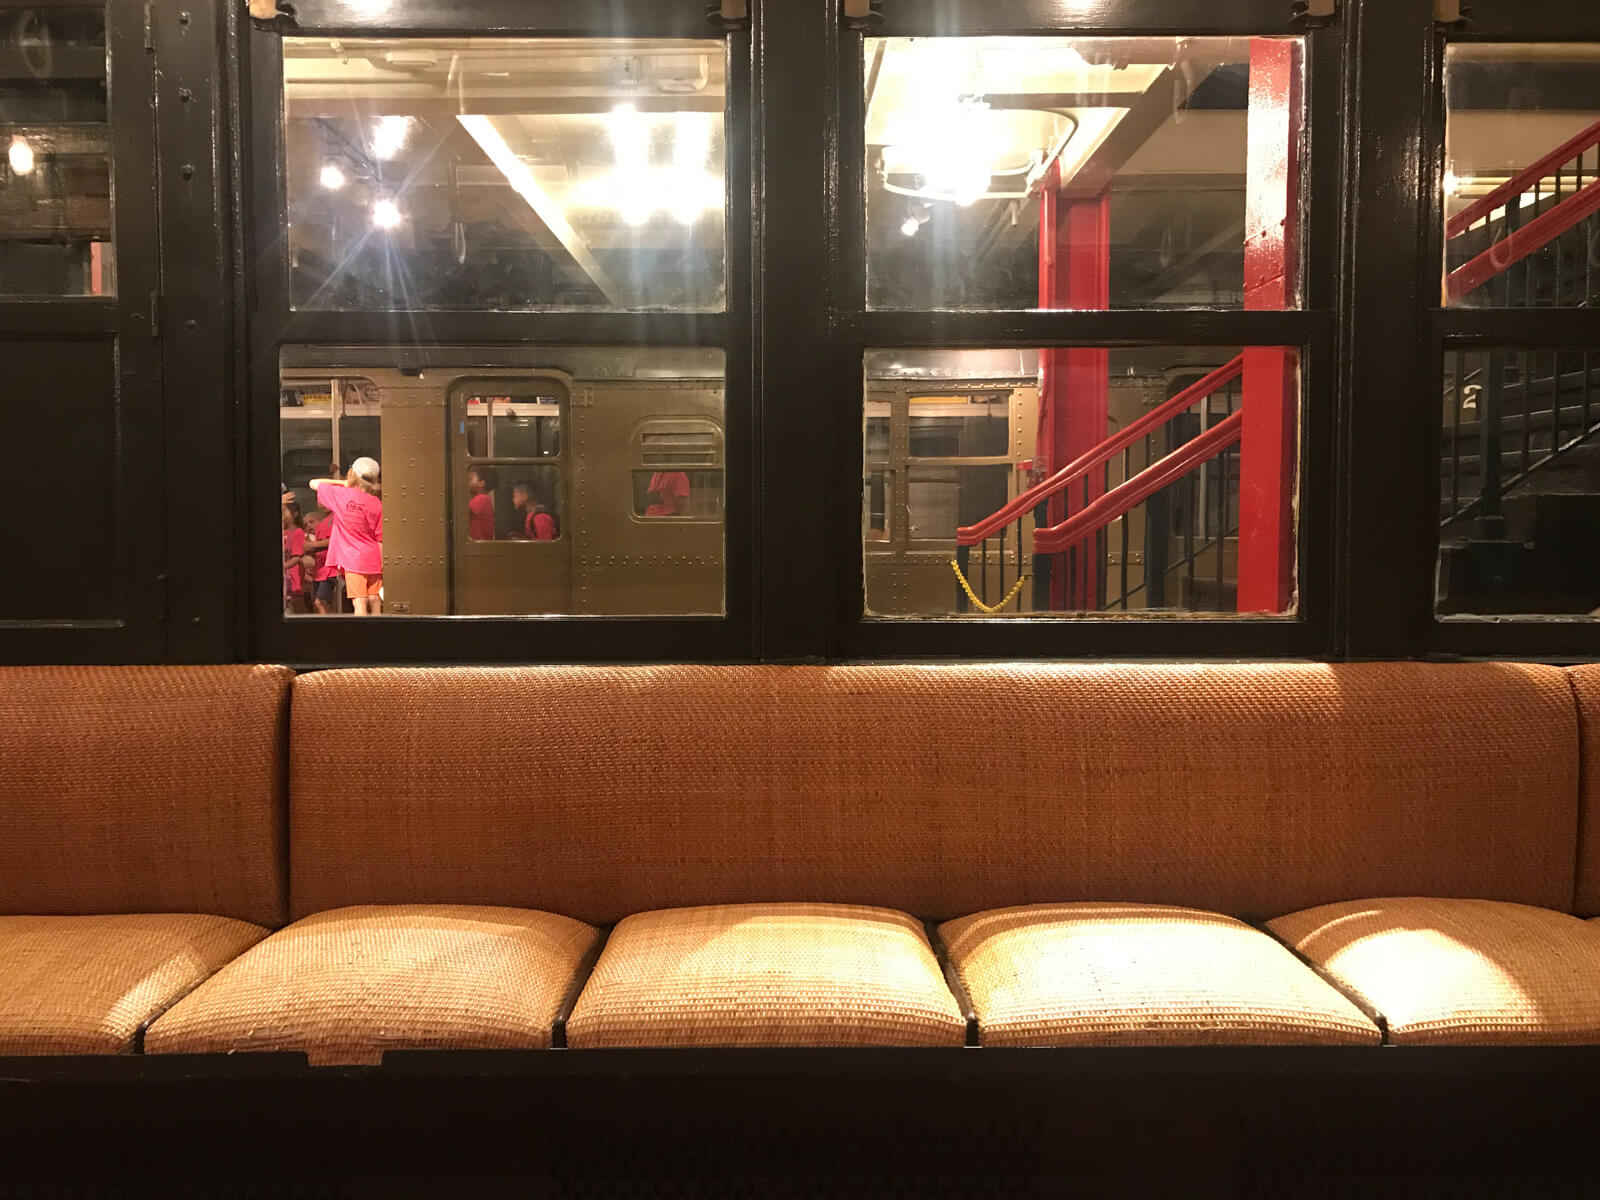 The inside seating of a retired train carriage, looking out onto the platform